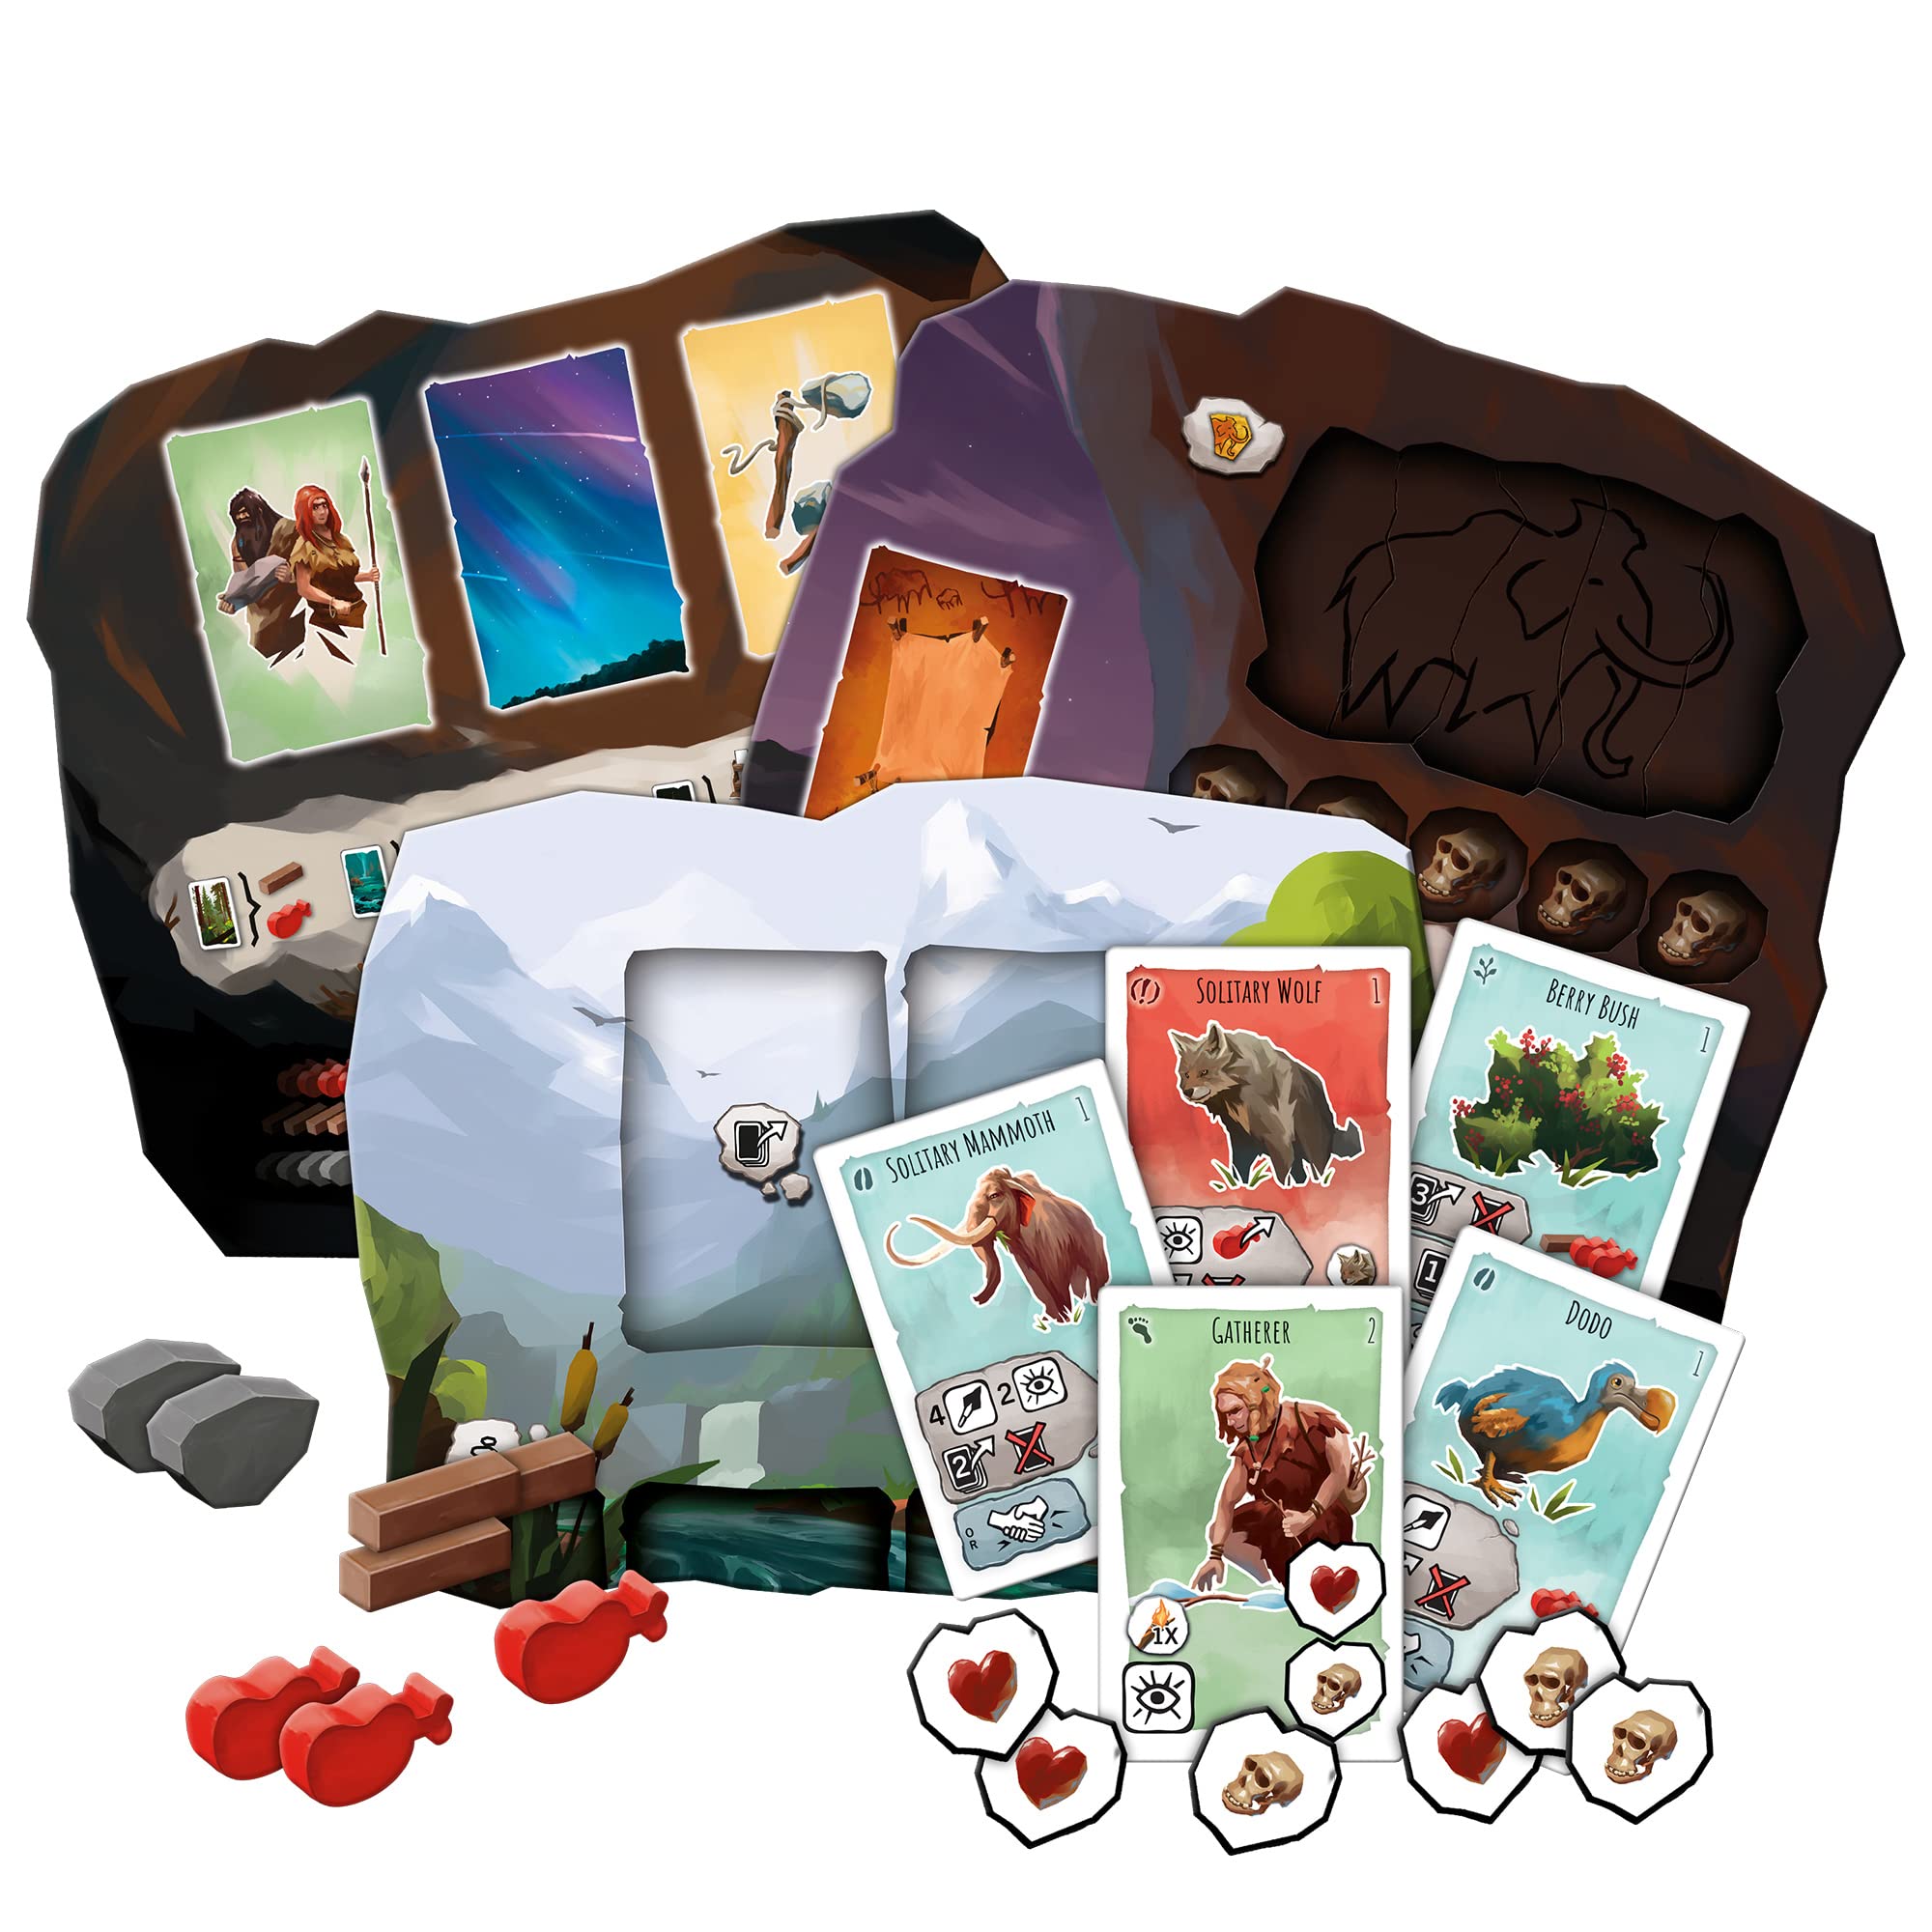 Paleo Board Game | Strategy Game | Stone Age Exploration Game | Cooperative Adventure Game for Adults and Kids | Ages 10+ | 2-4 Players | Average Playtime 45-60 Minutes | Made by Z-Man Games